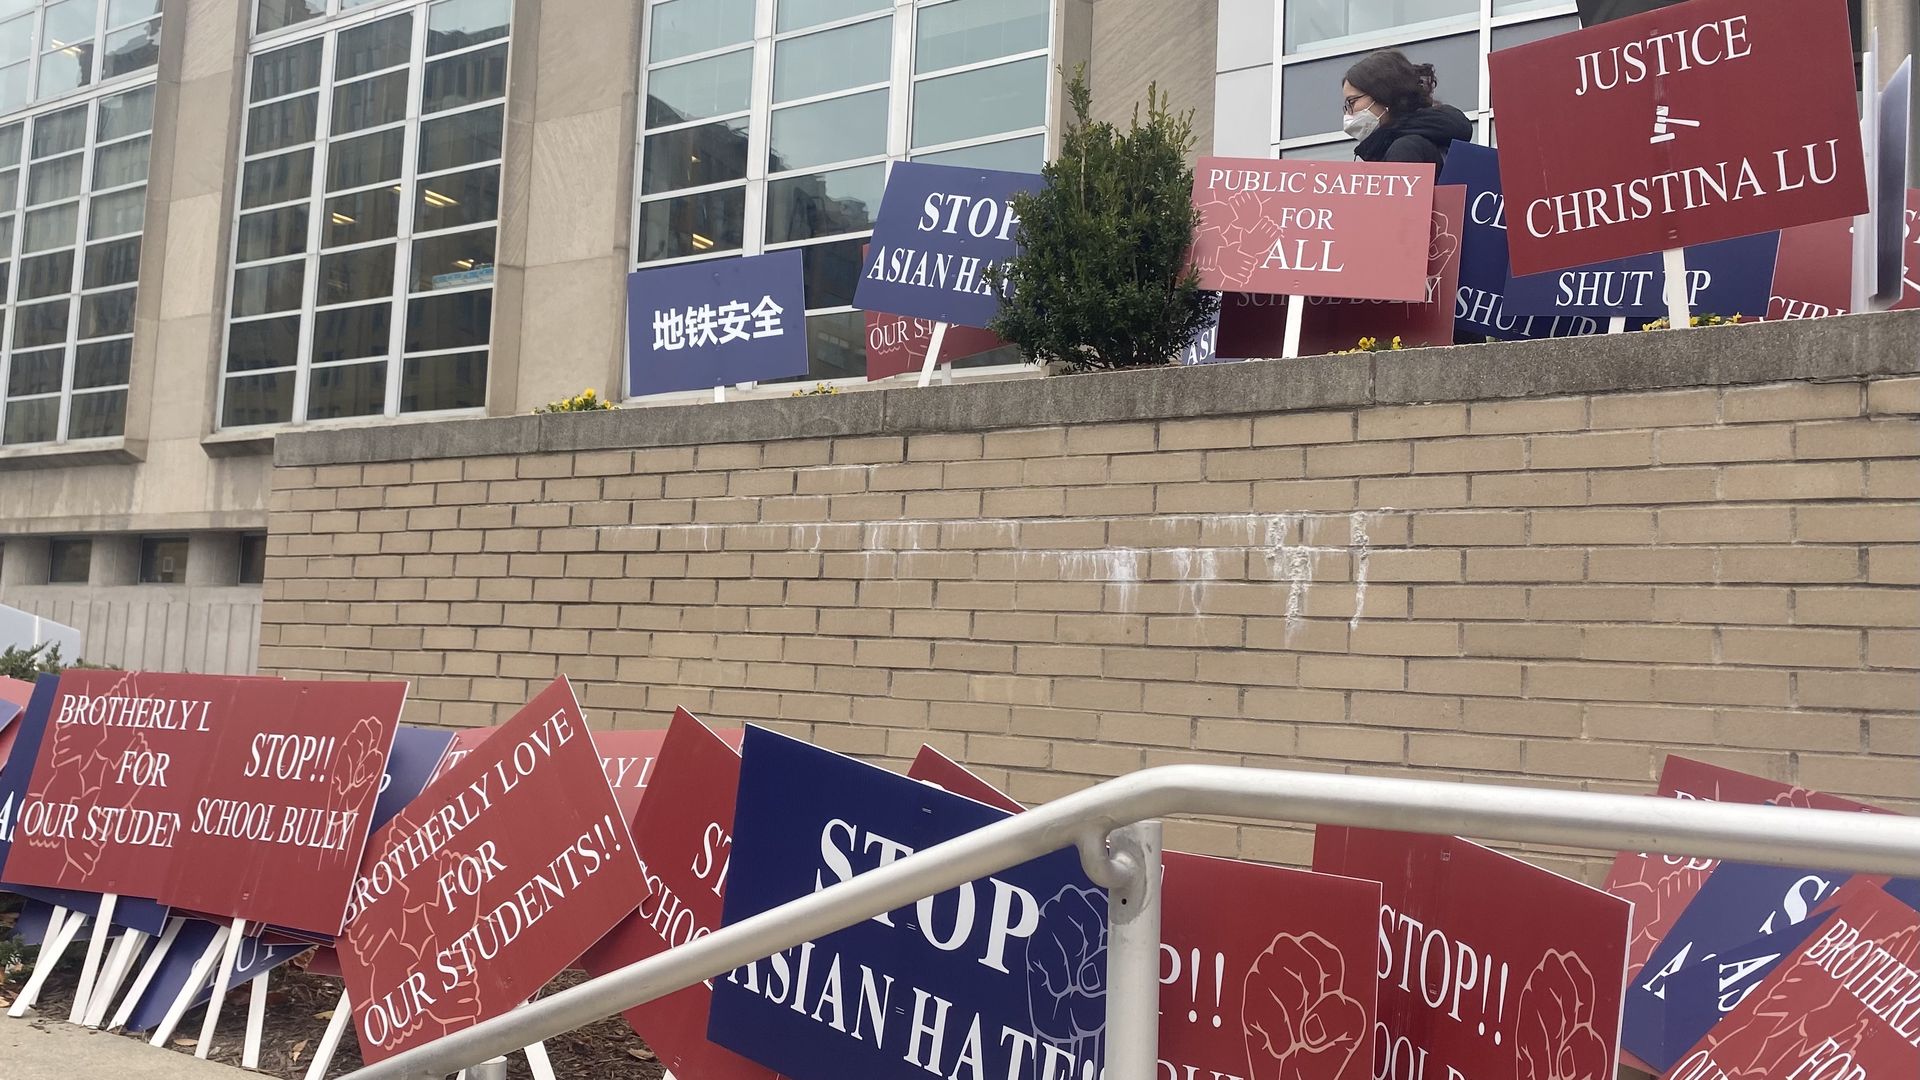 Supporters of Christina Lu leave signs at the School District of Philadelphia headquarters. Photo. Taylor Allen/Axios